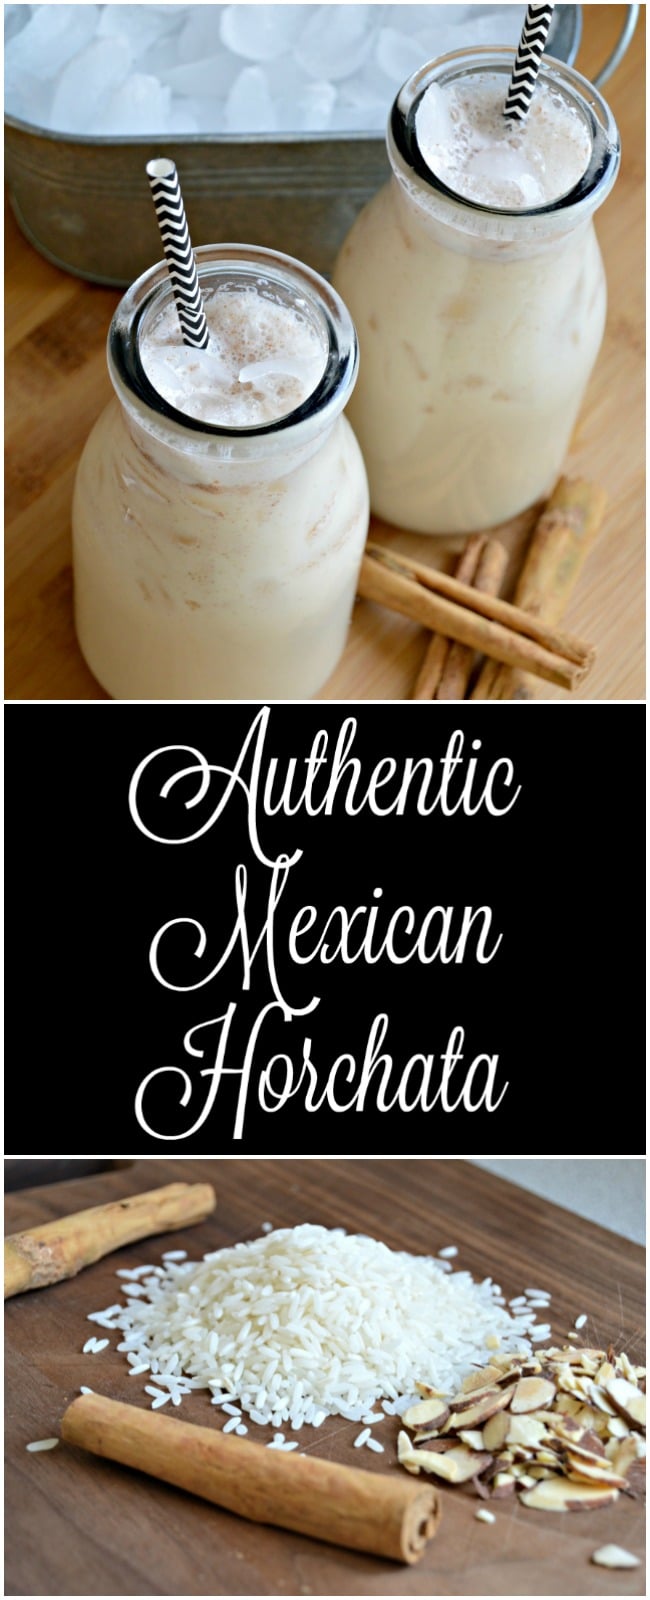 Authentic Mexican Horchata. Delicious. Refreshing. Easy.